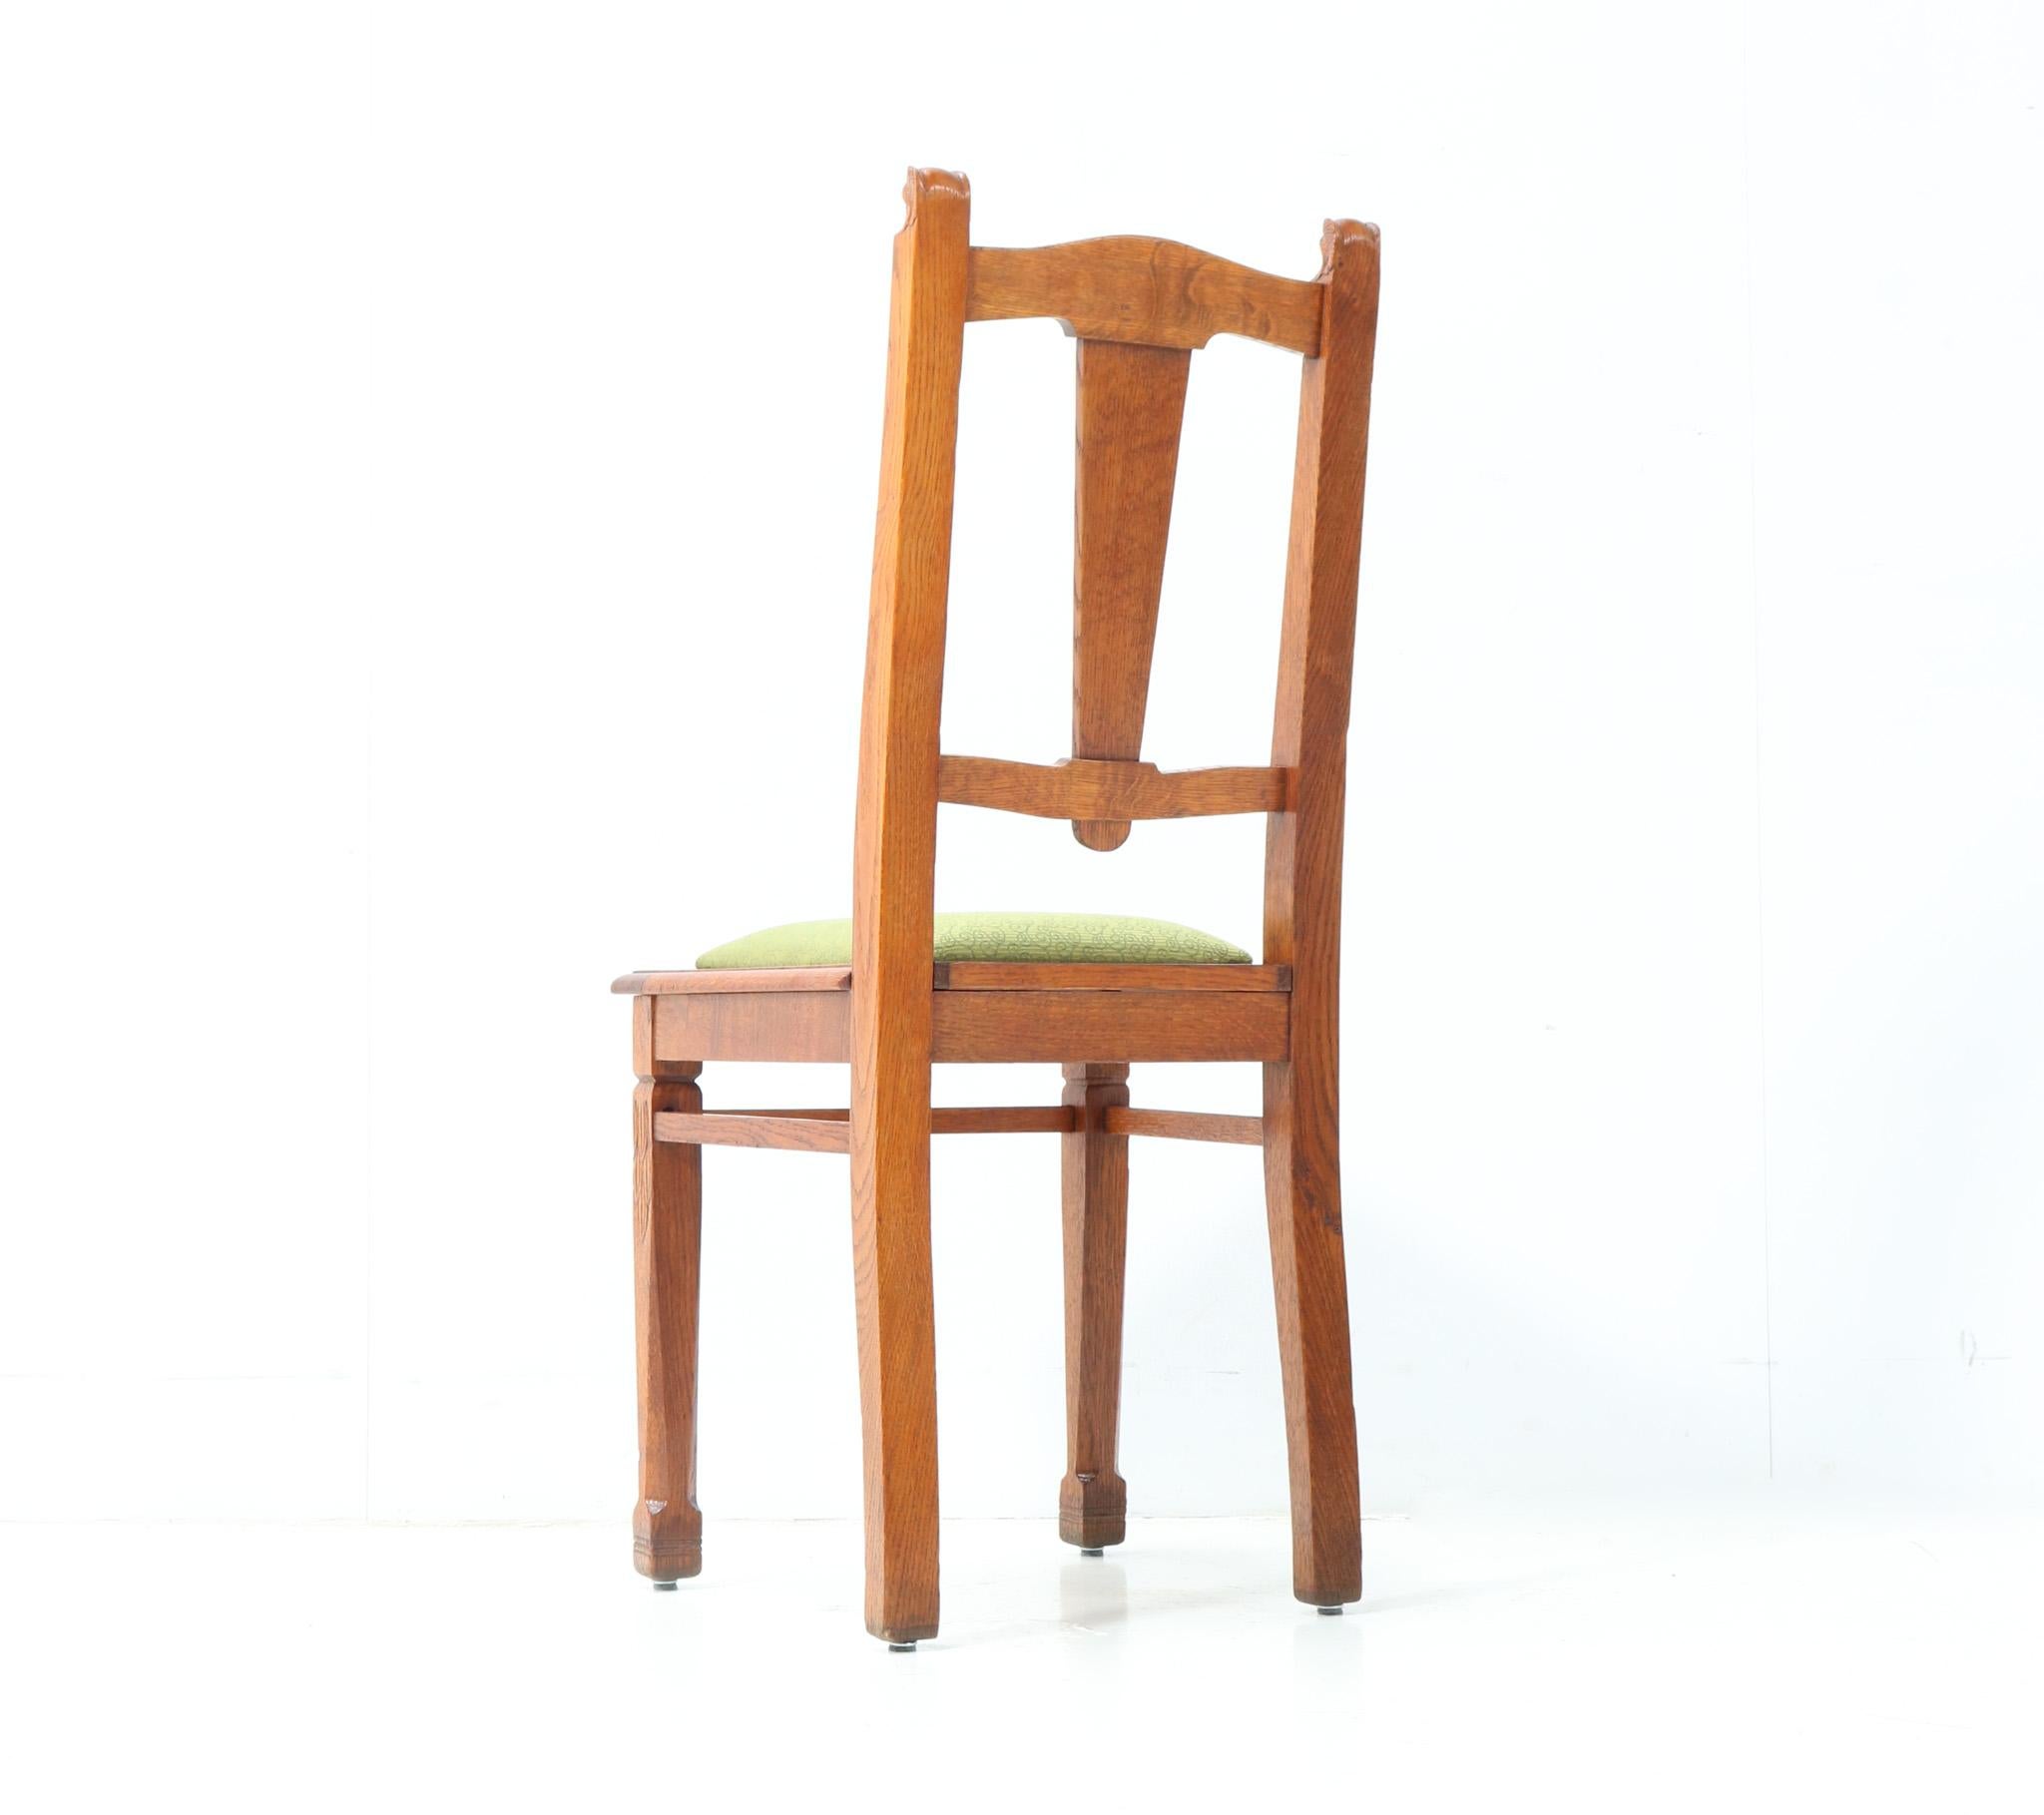 Oak Arts & Crafts Art Nouveau Side Chair by Kobus de Graaff, 1900s In Good Condition For Sale In Amsterdam, NL